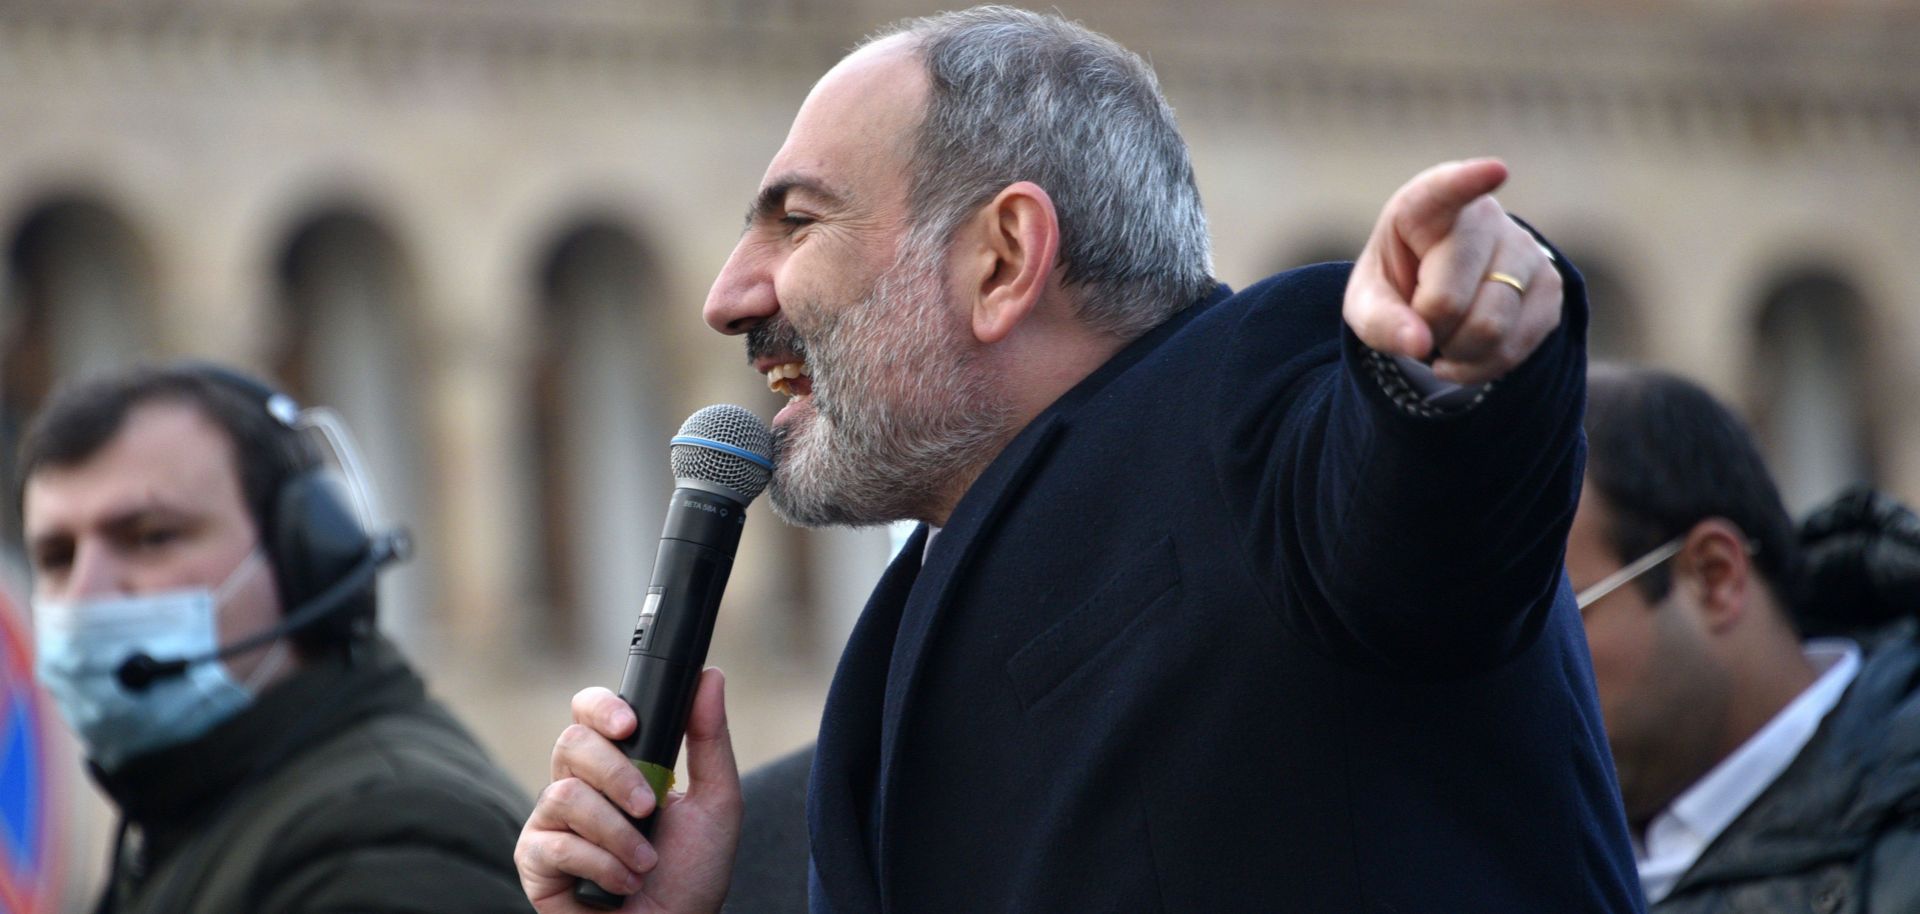 Armenian Prime Minister Nikol Pashinyan addresses his supporters gathered on Republic Square in downtown Yerevan, Armenia, on Feb. 25, 2021. Pashinyan called on the army to fulfill its duty and obey the people after the military called for him to resign. 